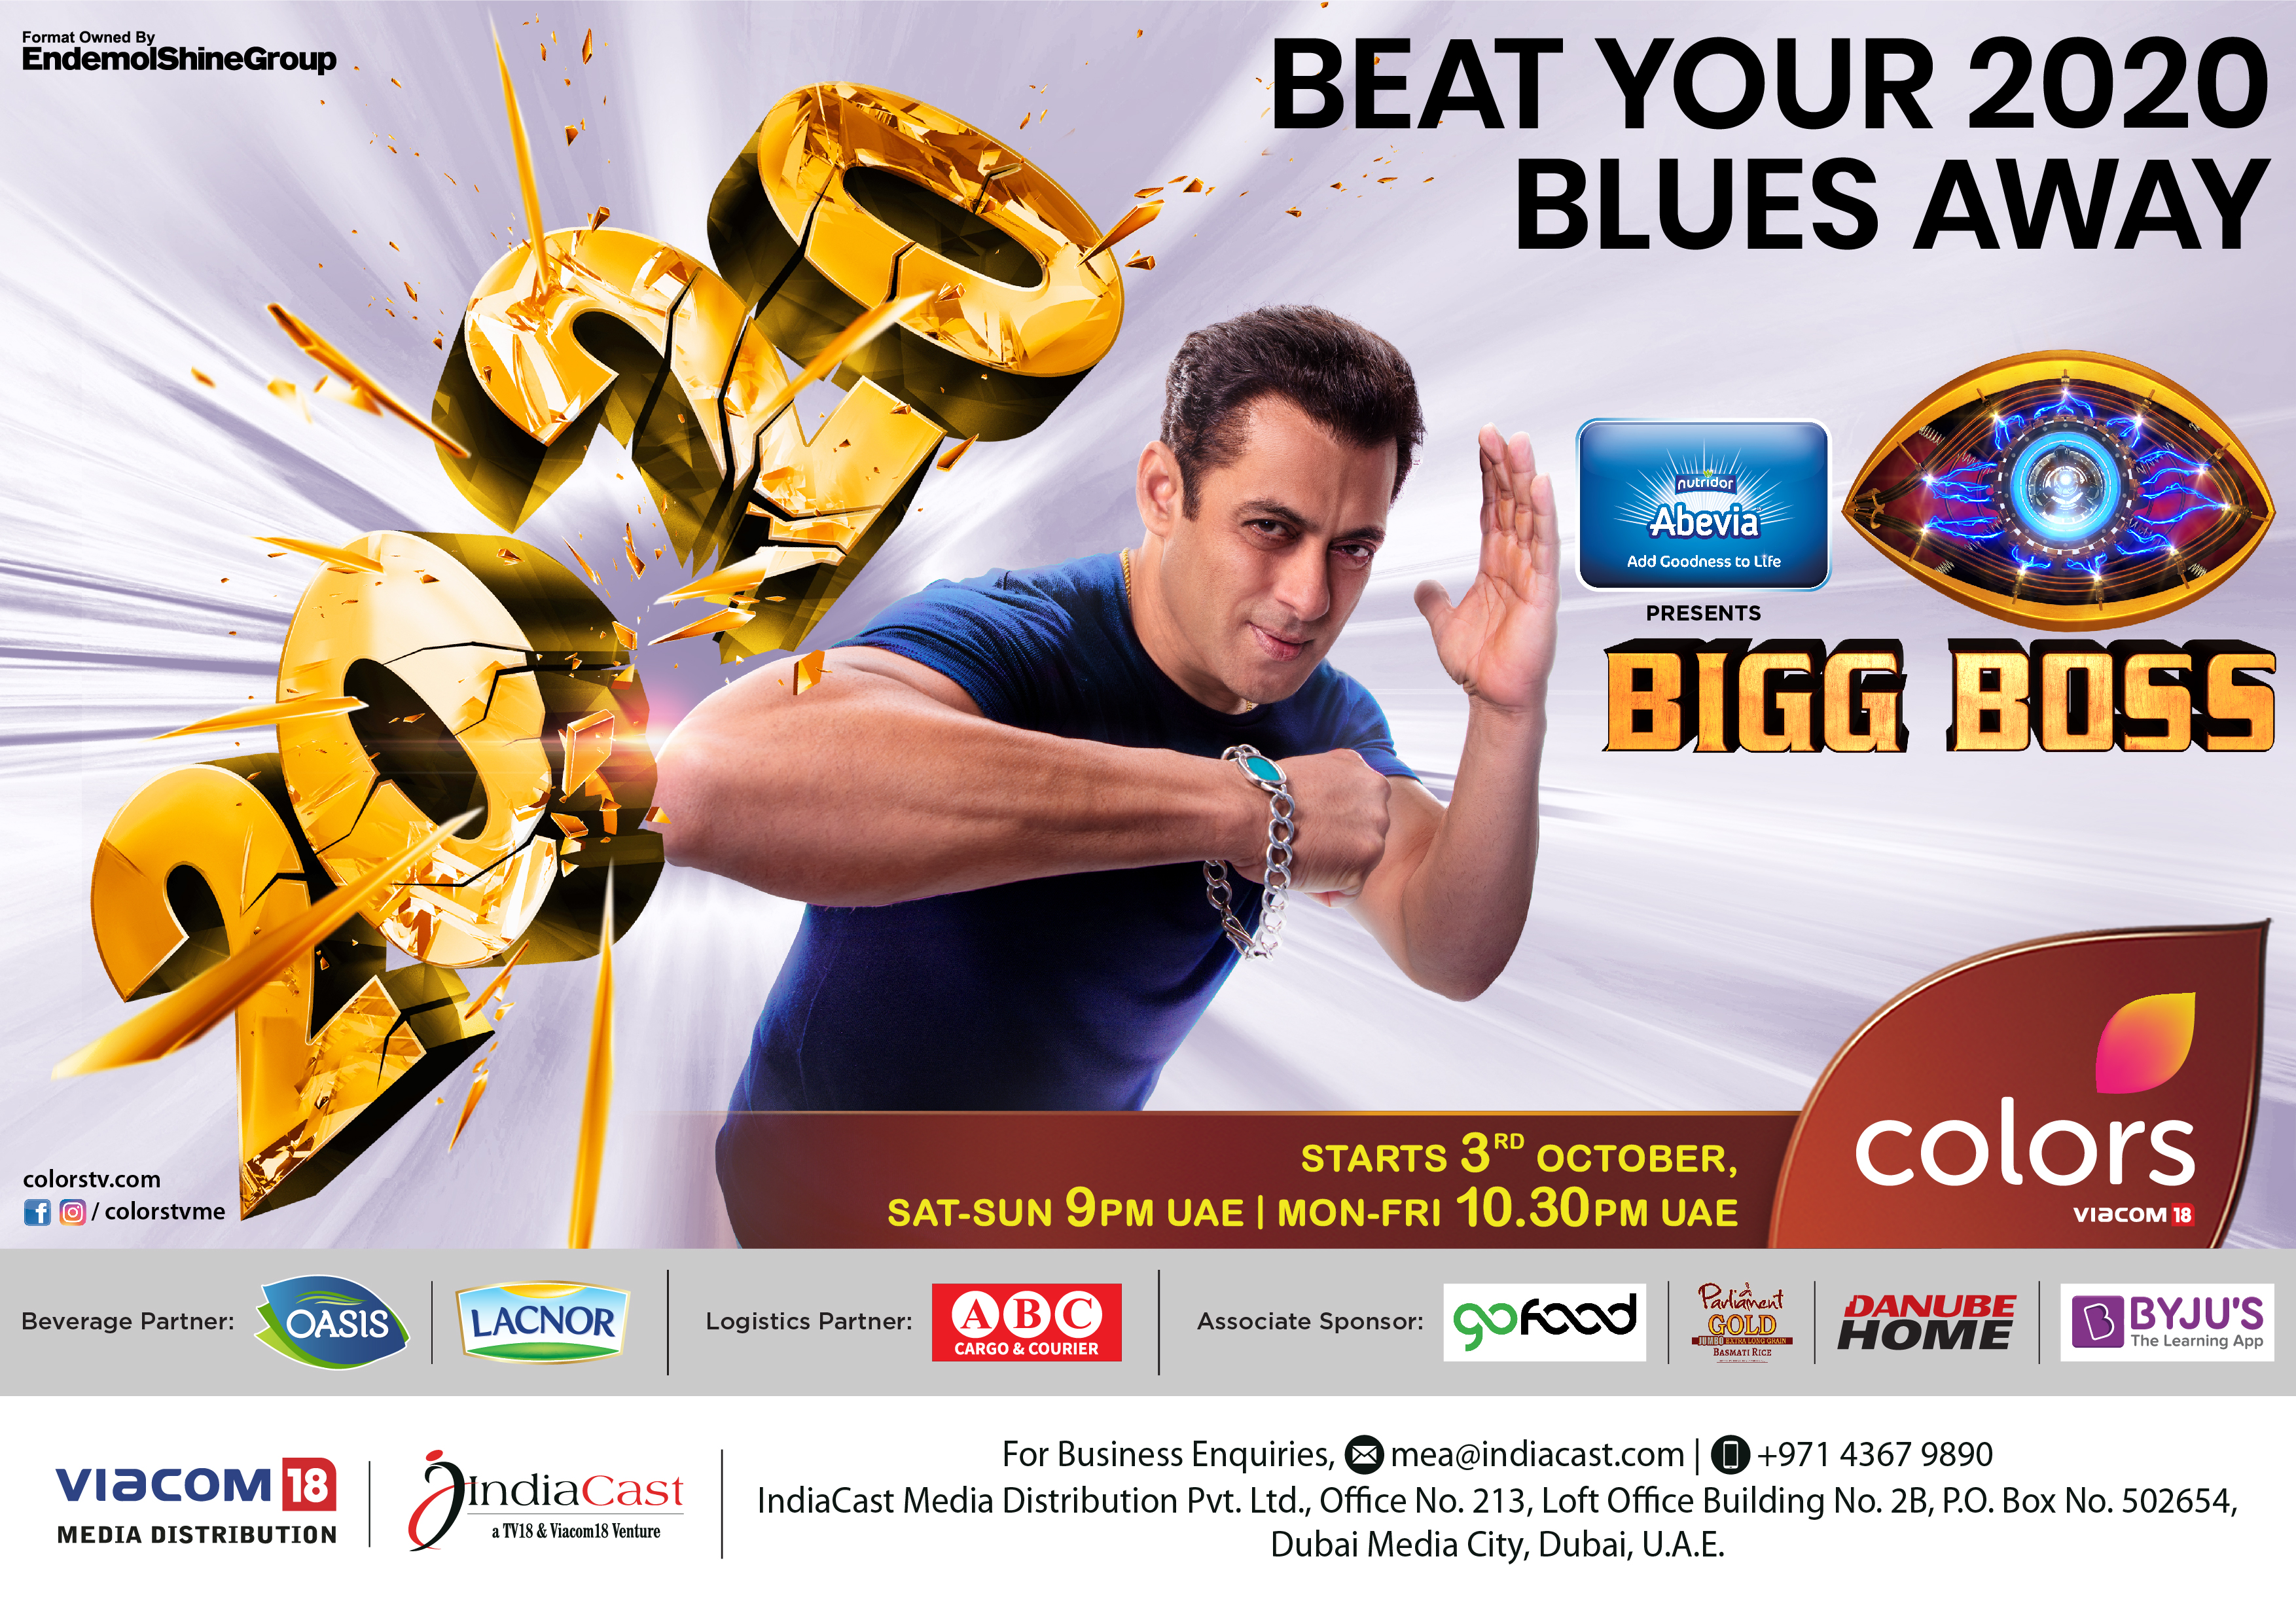 India's biggest reality show, Bigg Boss is on Colors TV Campaign Middle